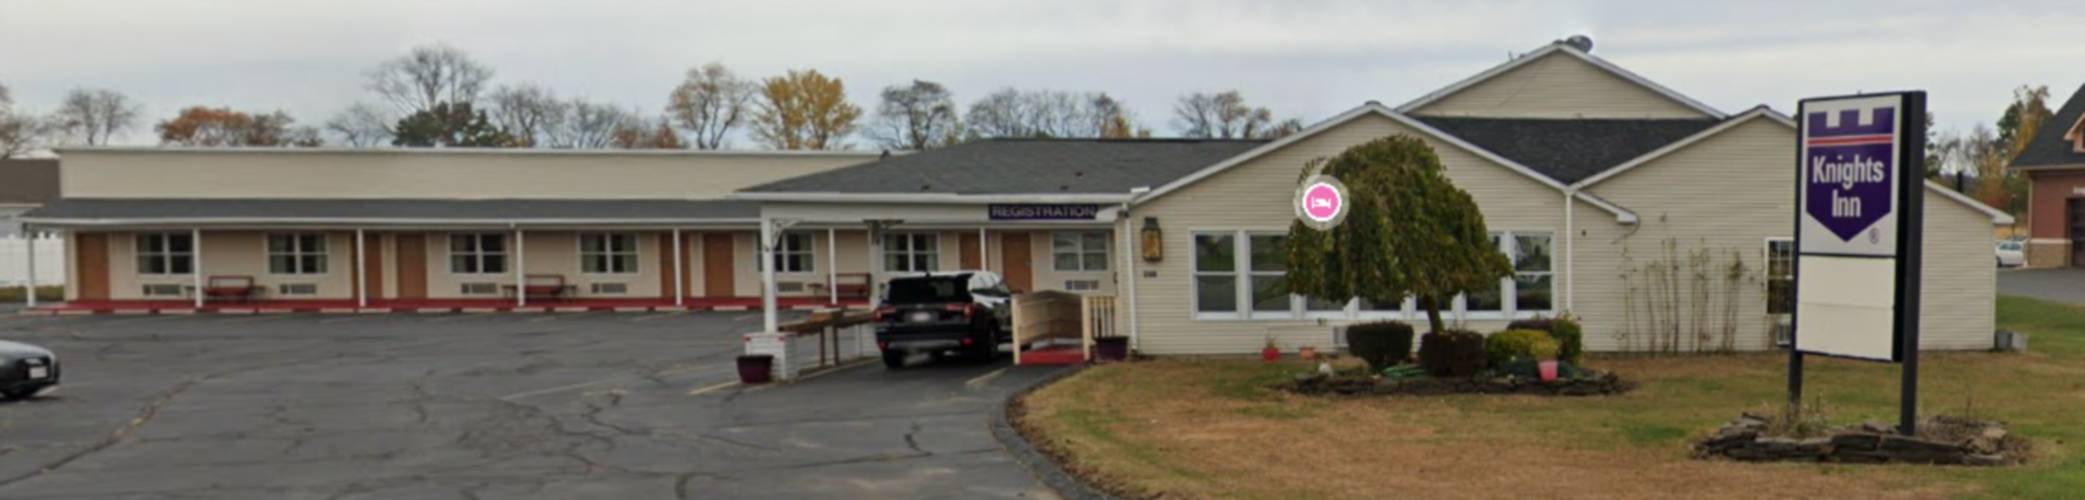 A service provider will soon start helping the 11 families who are staying at the Knights Inn in Hadley through the state’s emergency shelter system.